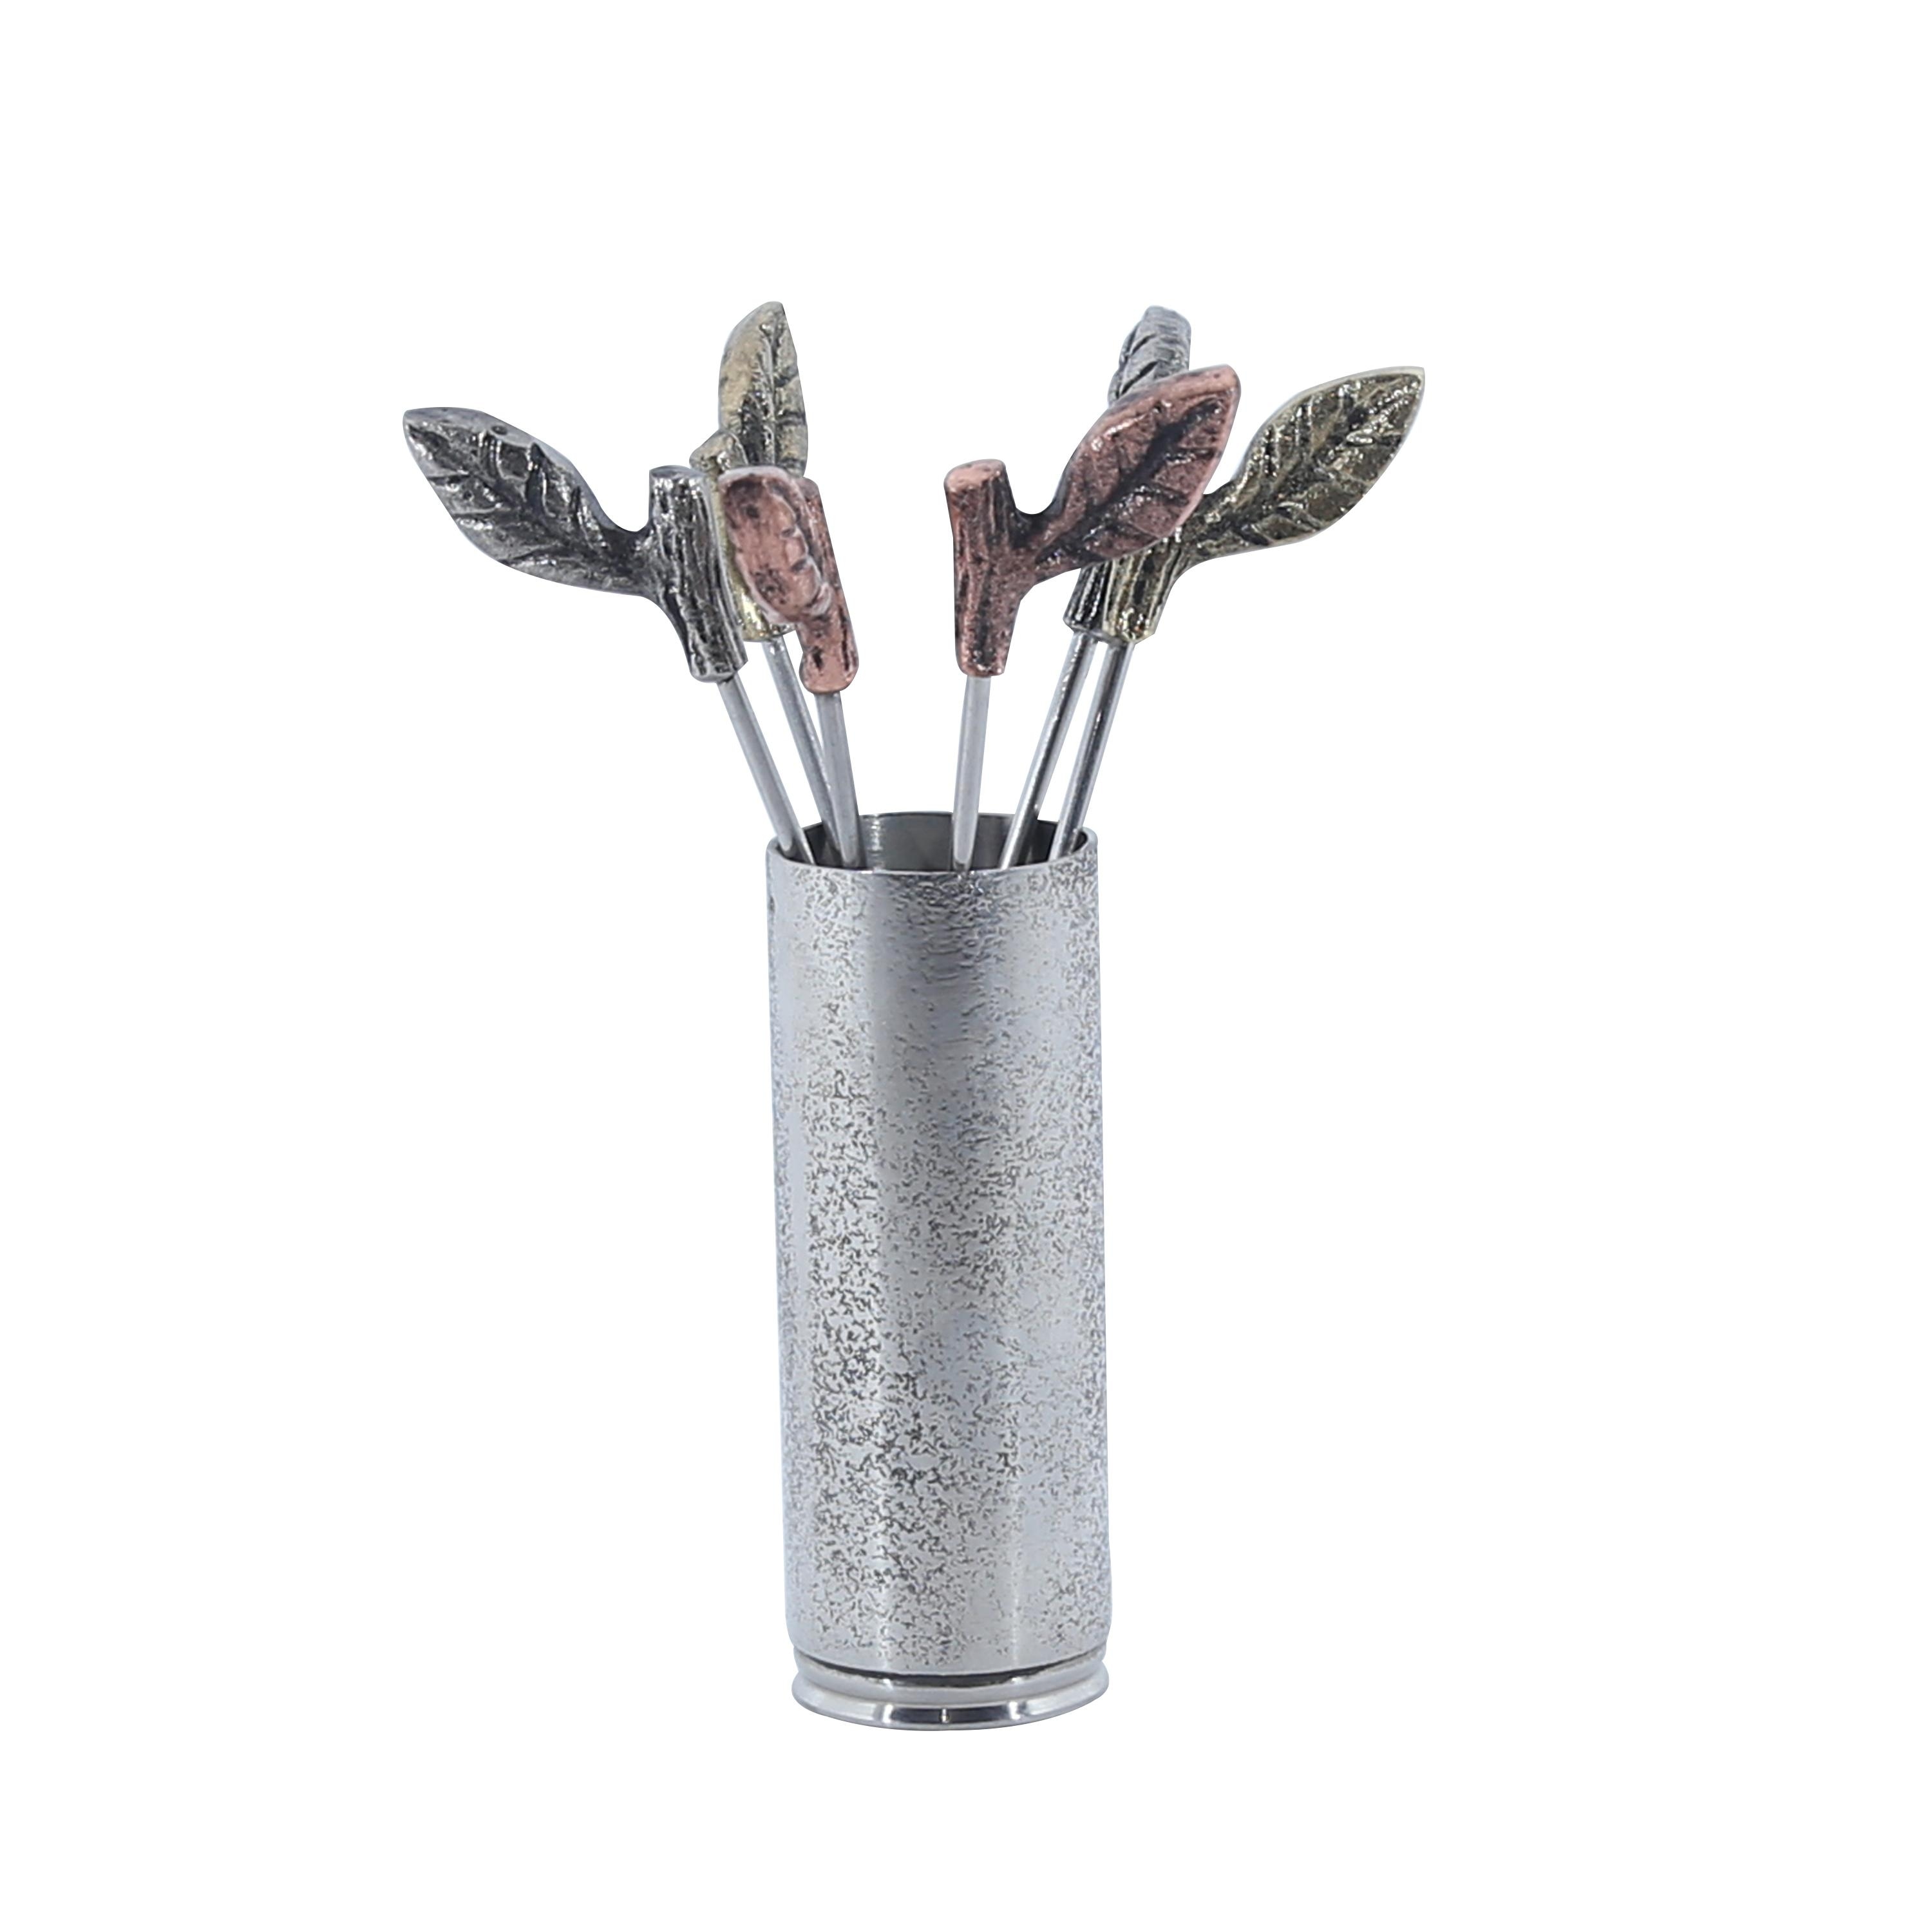 https://ak1.ostkcdn.com/images/products/is/images/direct/cef6b7615179b31c24ba3b6ec0a5e17aec155ad9/Inox-Twig-Leaf-Design-7-piece-Steel-Olive-Cheese-Picks-with-Holder.jpg